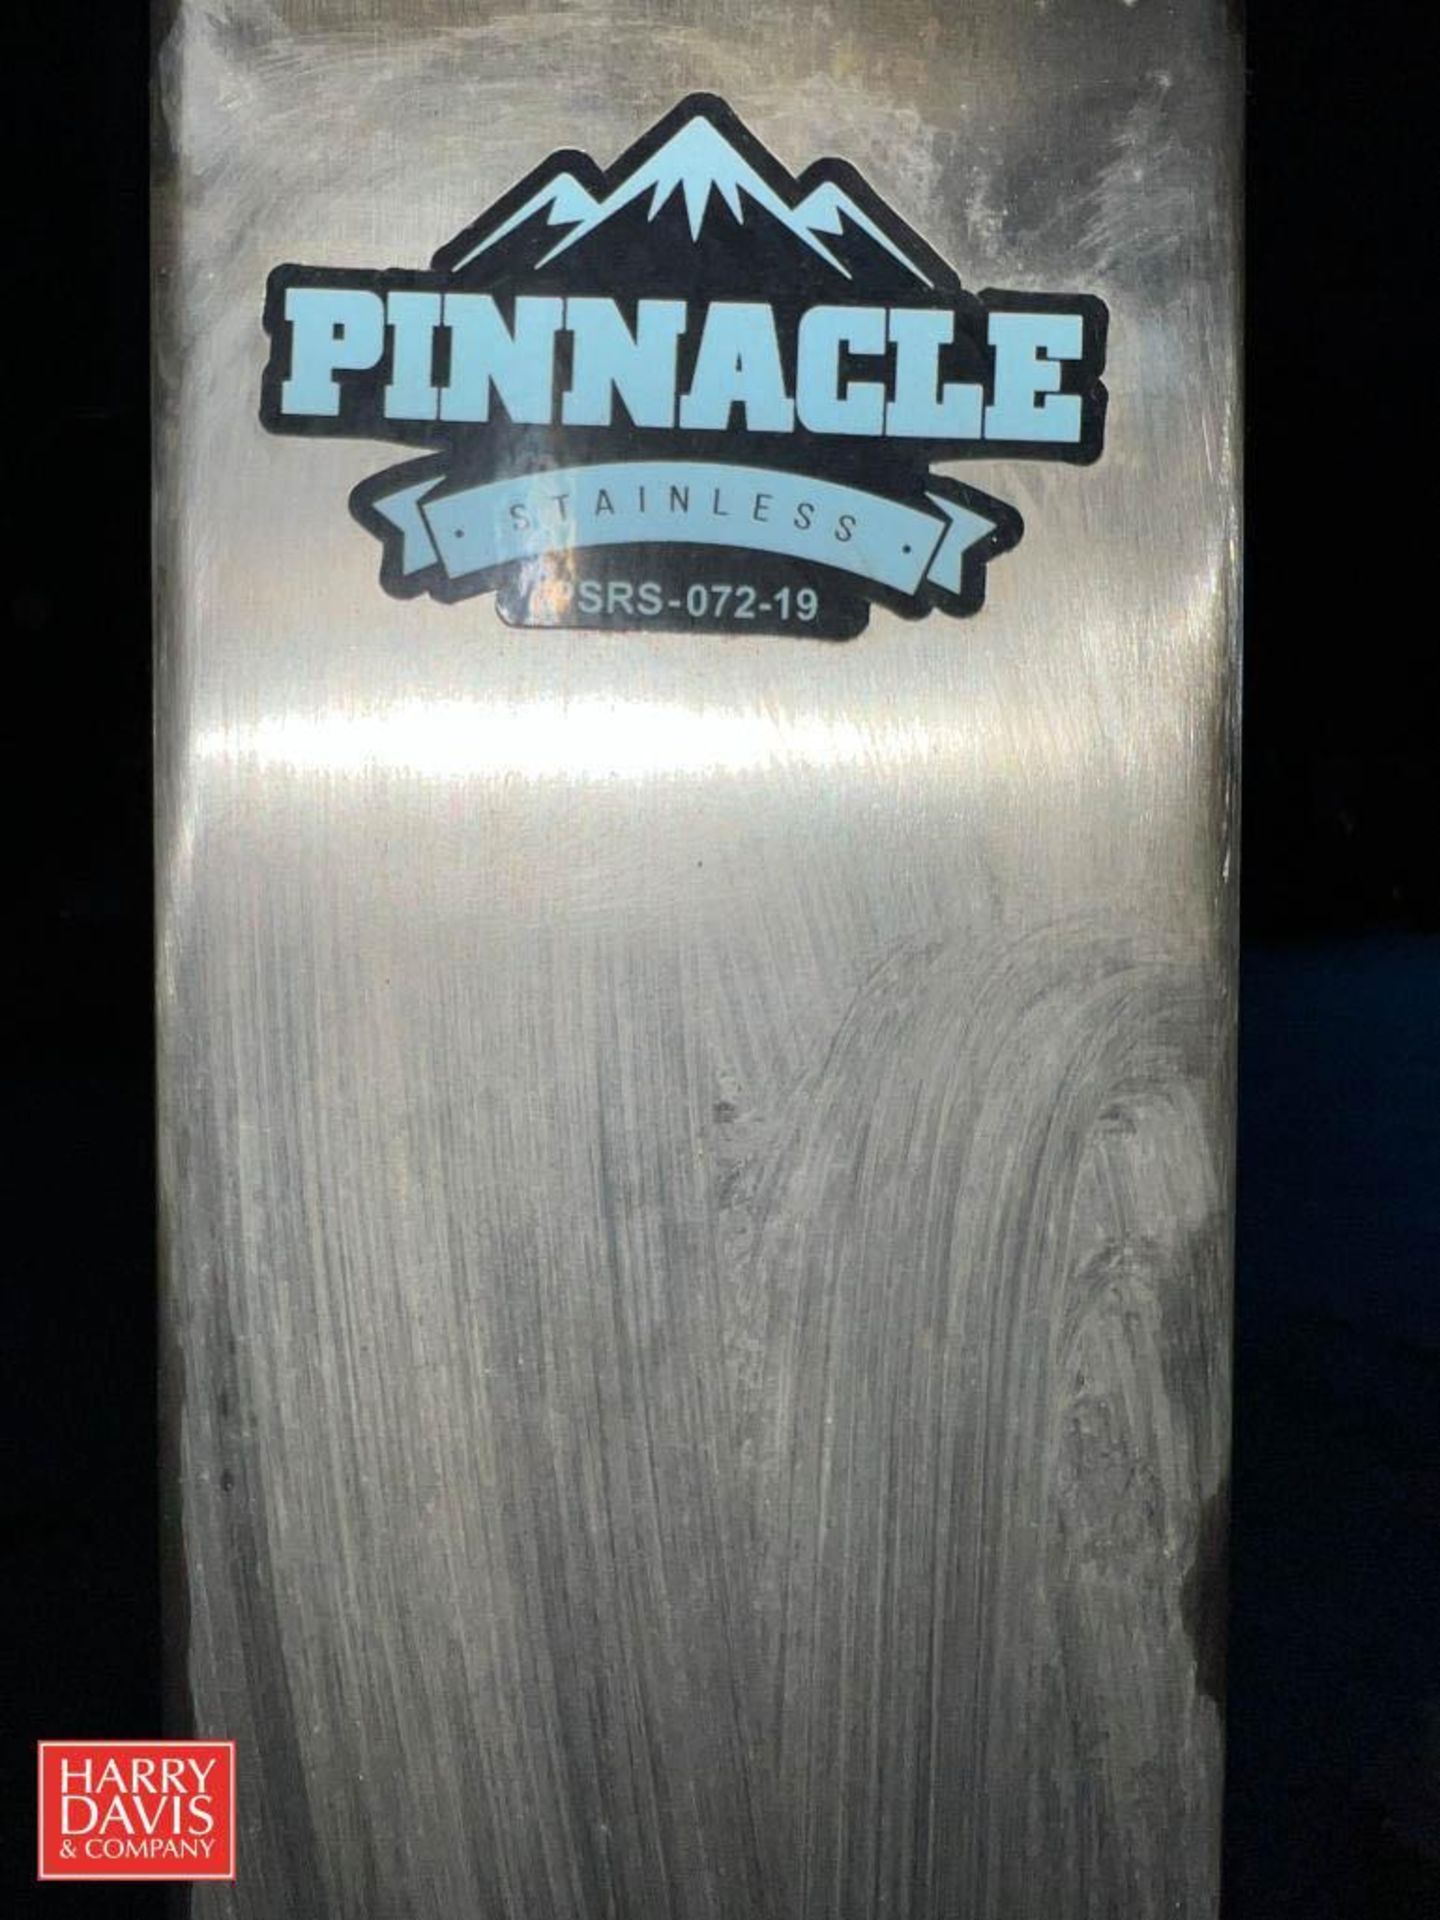 Pinnacle Stainless Ethanol Chilling System, S/N: PSRS-072-19 with 200 Gallon and 90 Gallon S/S Tanks - Image 2 of 2